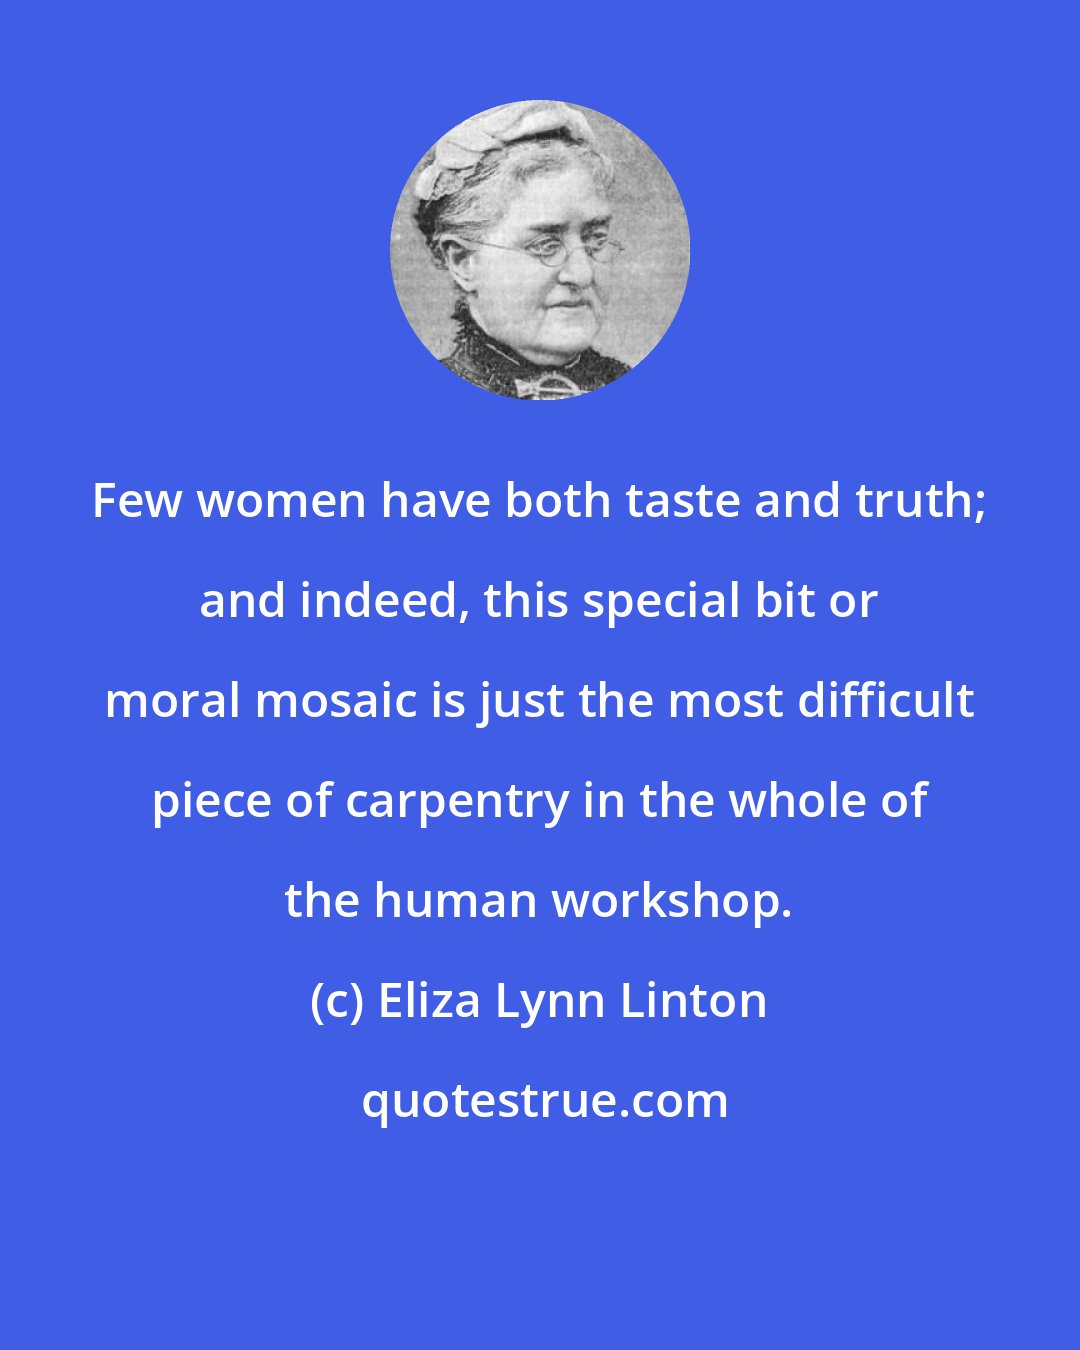 Eliza Lynn Linton: Few women have both taste and truth; and indeed, this special bit or moral mosaic is just the most difficult piece of carpentry in the whole of the human workshop.